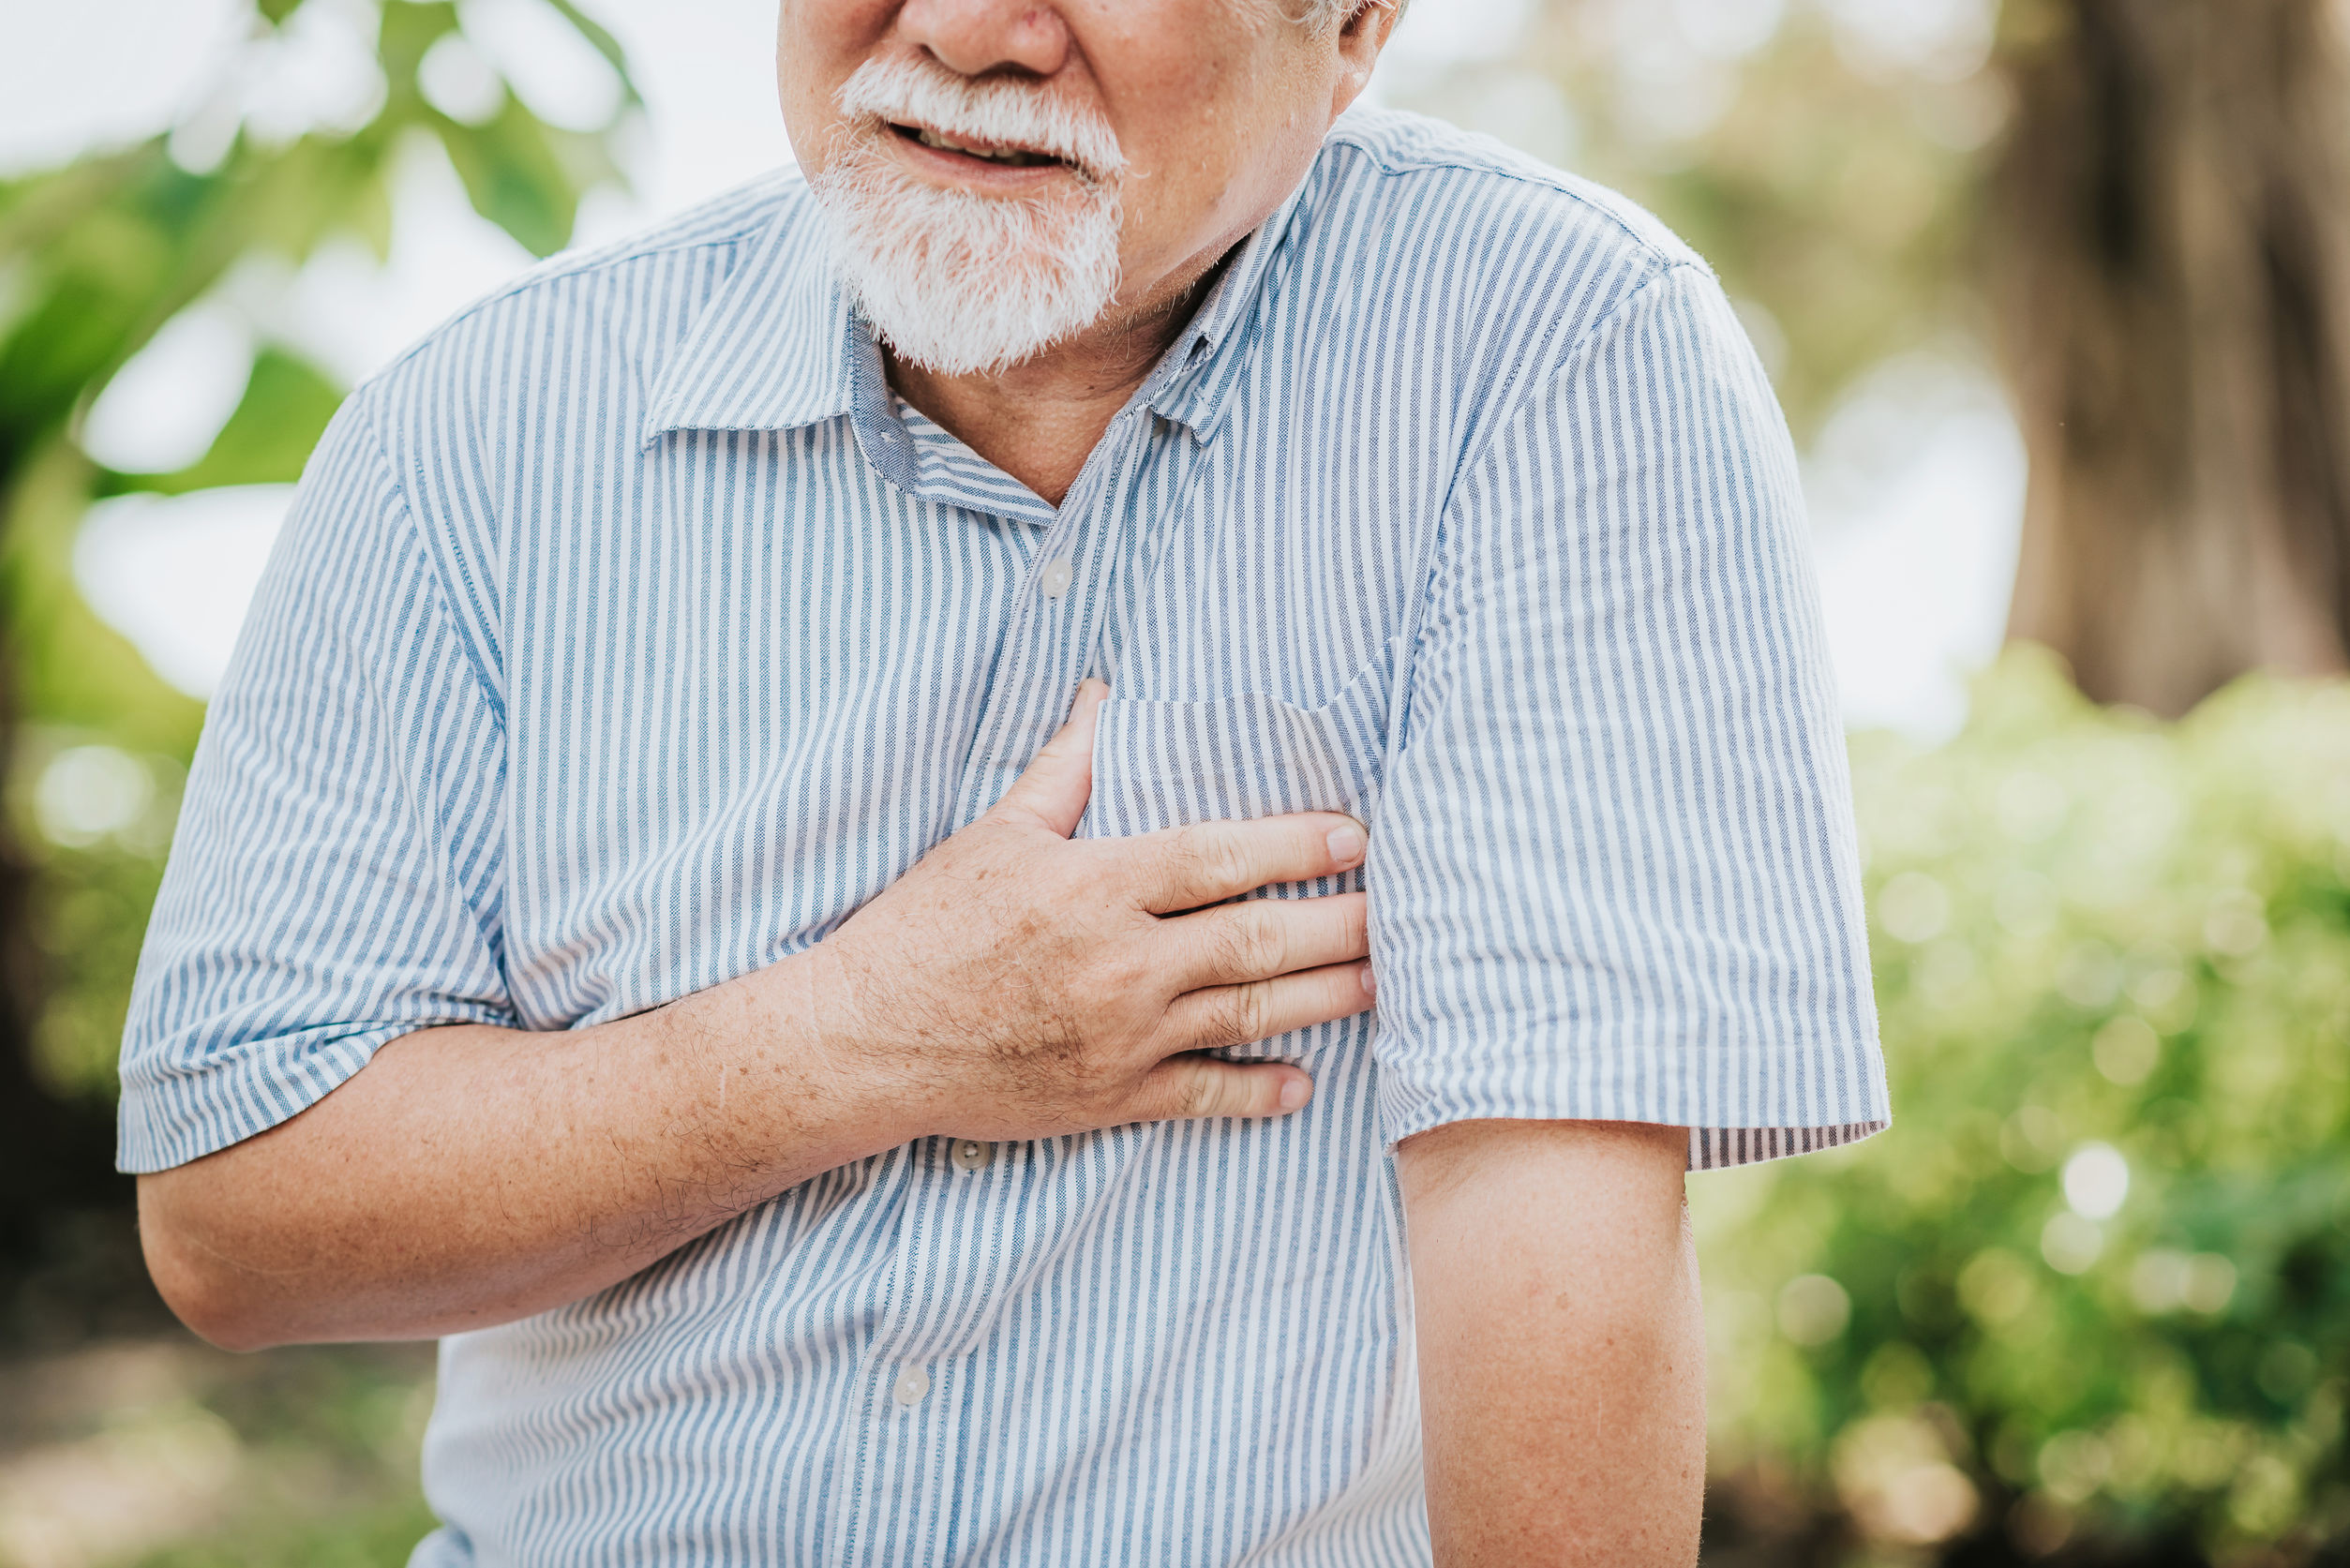 Elder patient is having a sign of getting a heart attack